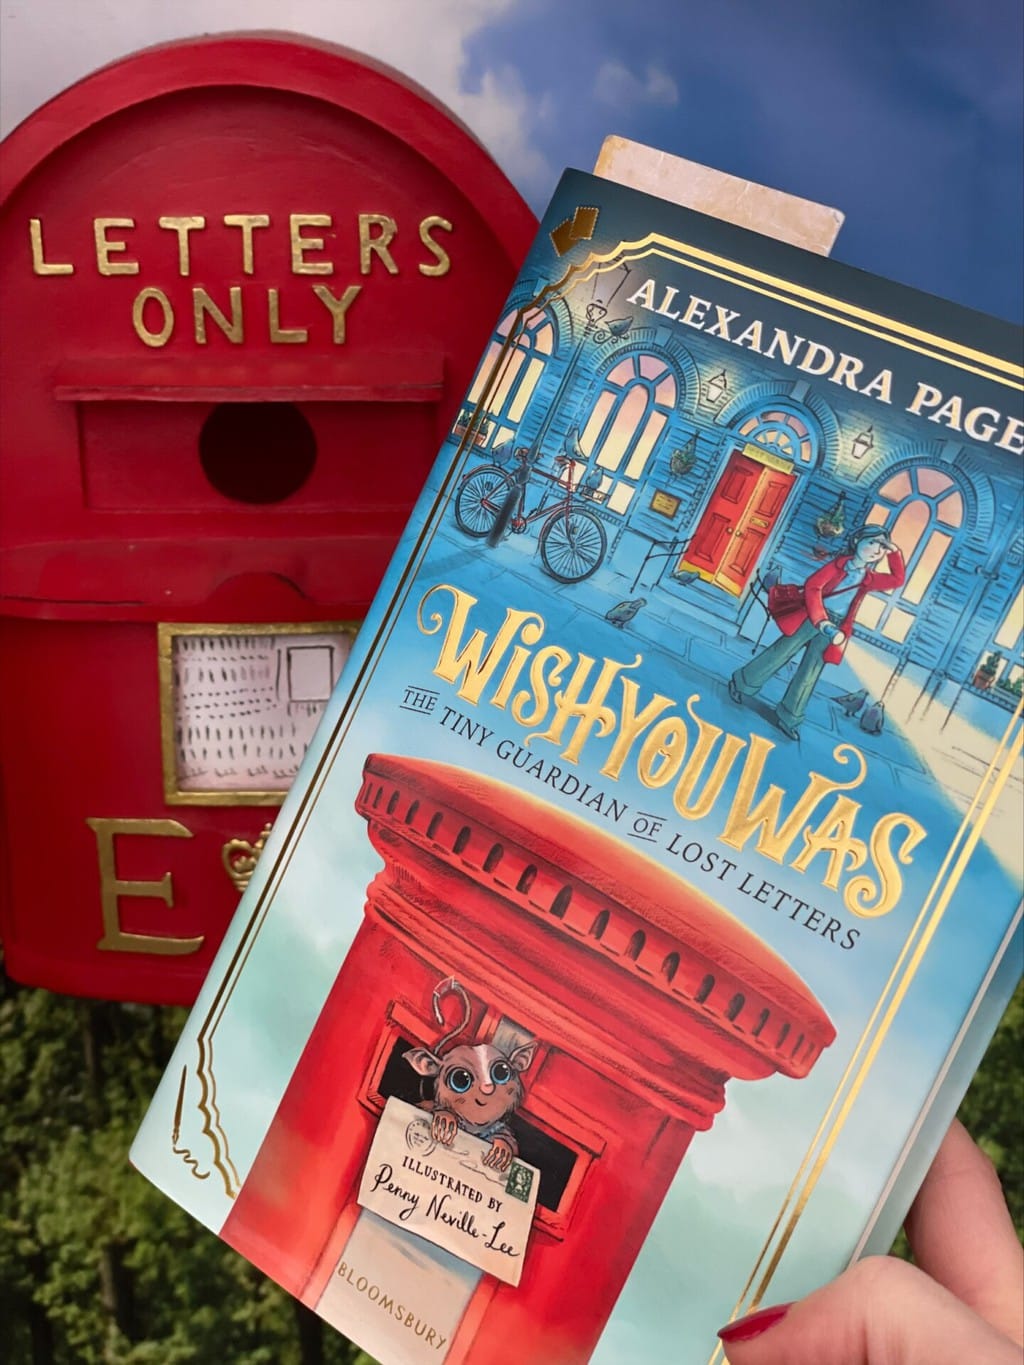 WishYouWas The Tiny Guardian of Lost Letters  - Alexandra Page (author), Penny Neville-Lee (illustrator), Bloomsbury Children’s Books (publisher), recommended reading age: 9-11 years